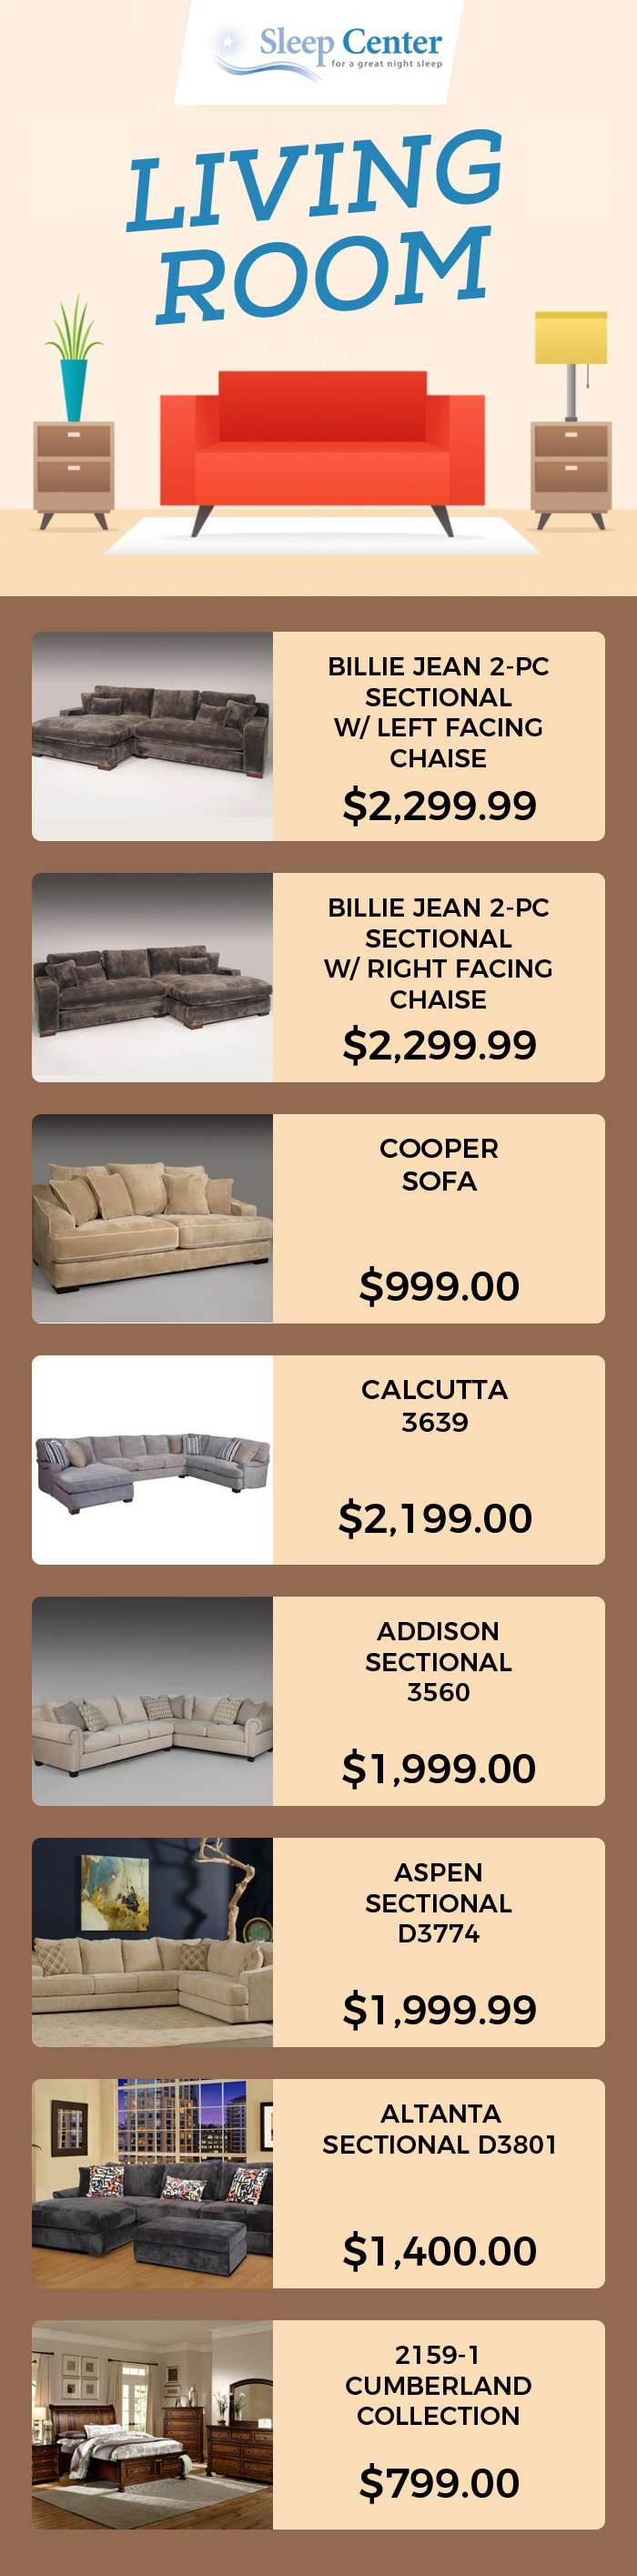 Explore Sleep Center’s Living Room Furniture to Fit your Home Decor